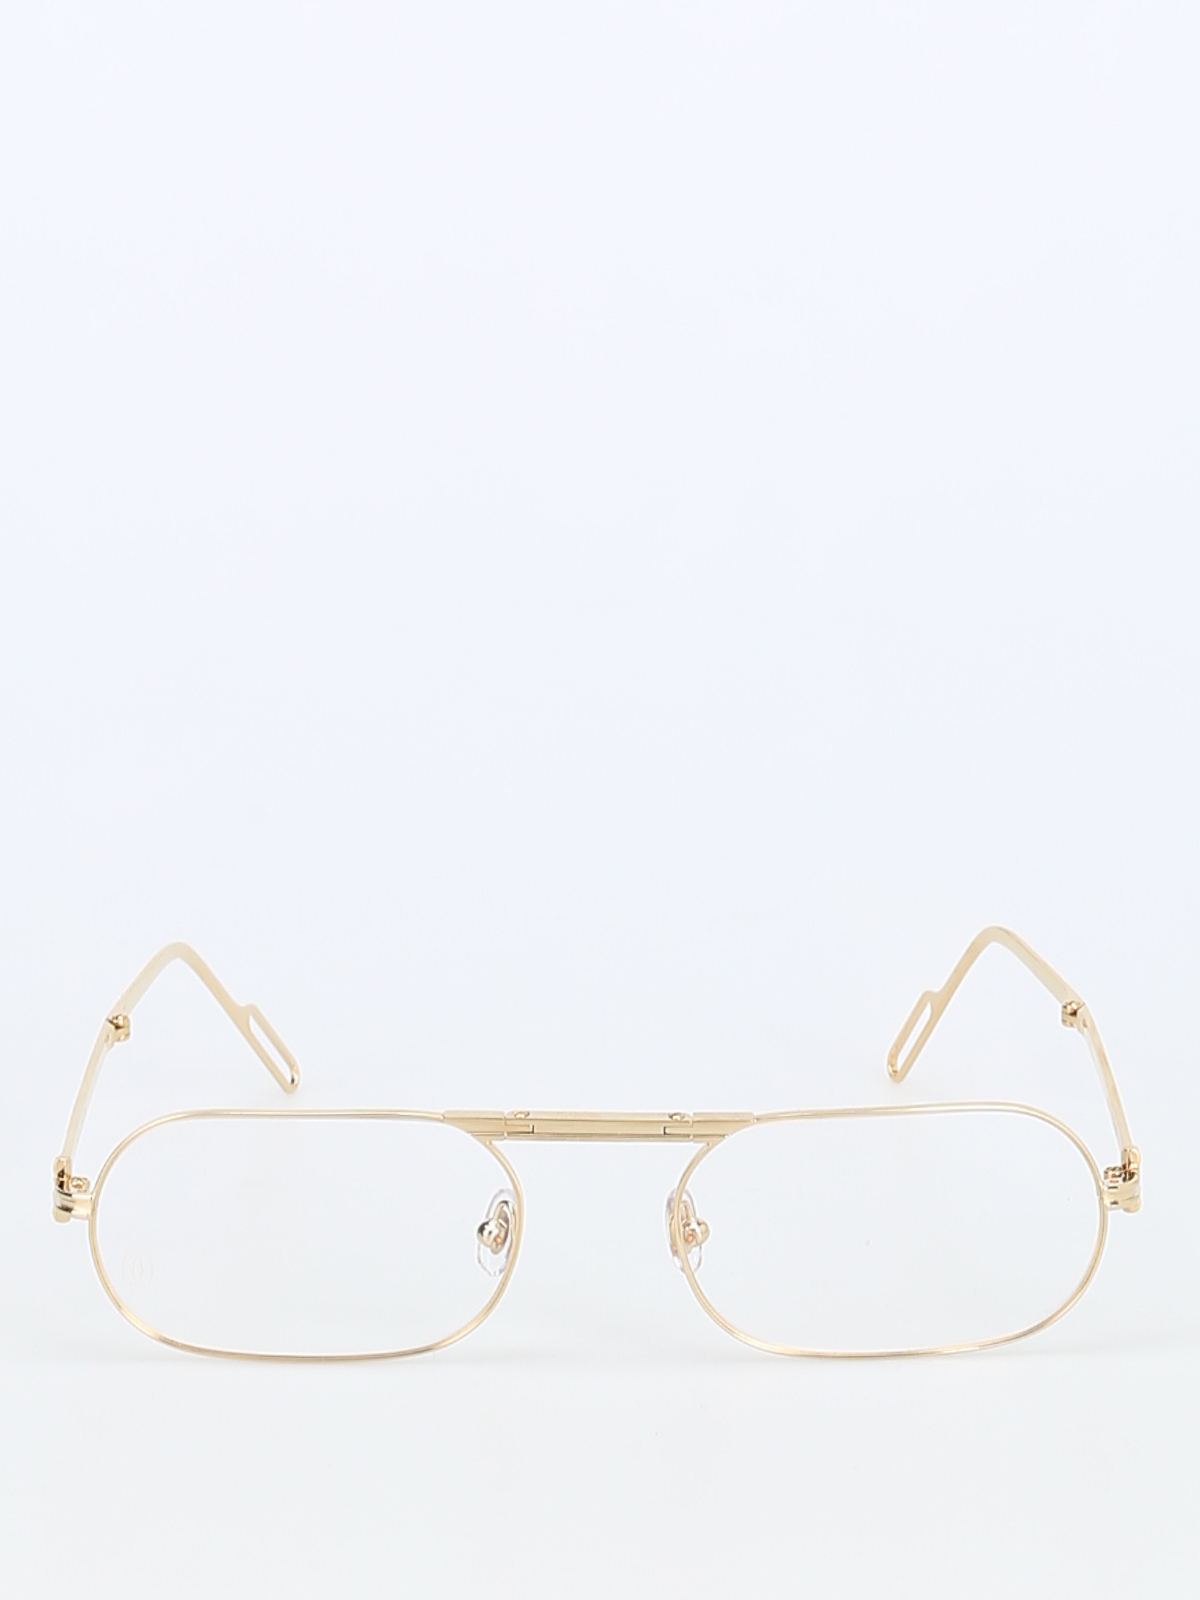 buy used cartier glasses